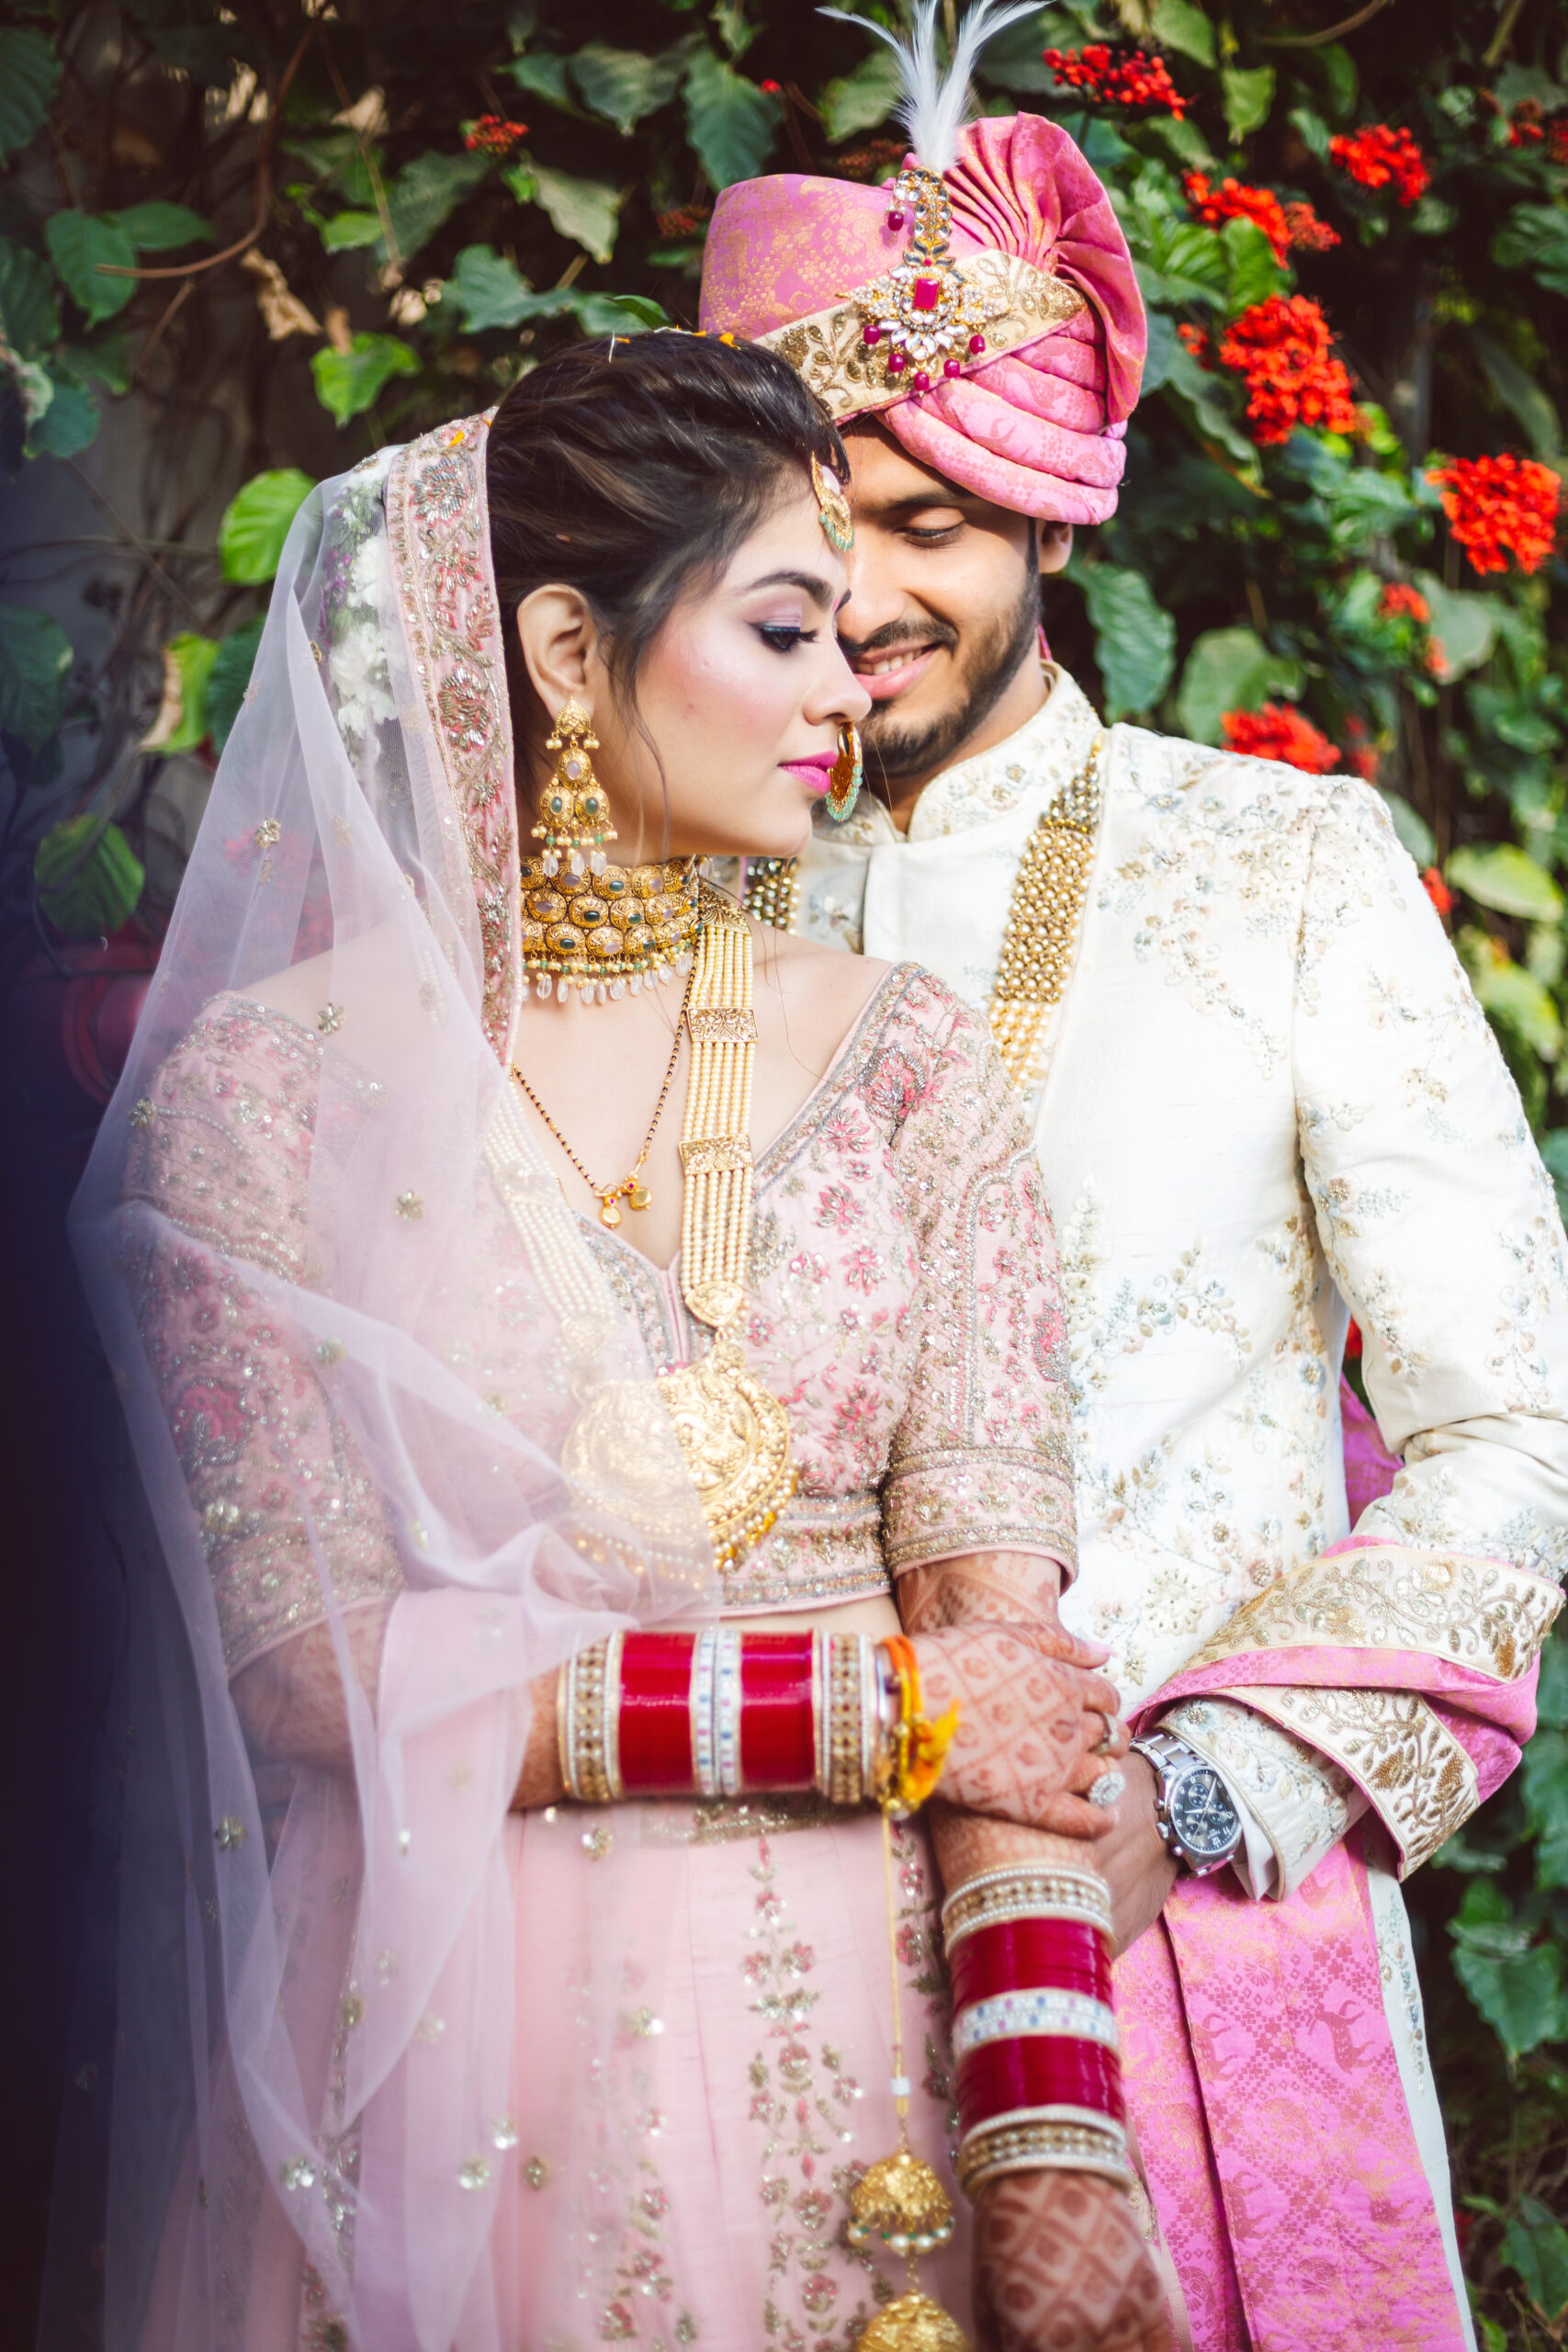 Candid Couple Shot - Bride in a Red Sequinned Lehenga and … | Indian  wedding photography poses, Indian wedding photography couples, Wedding couple  poses photography